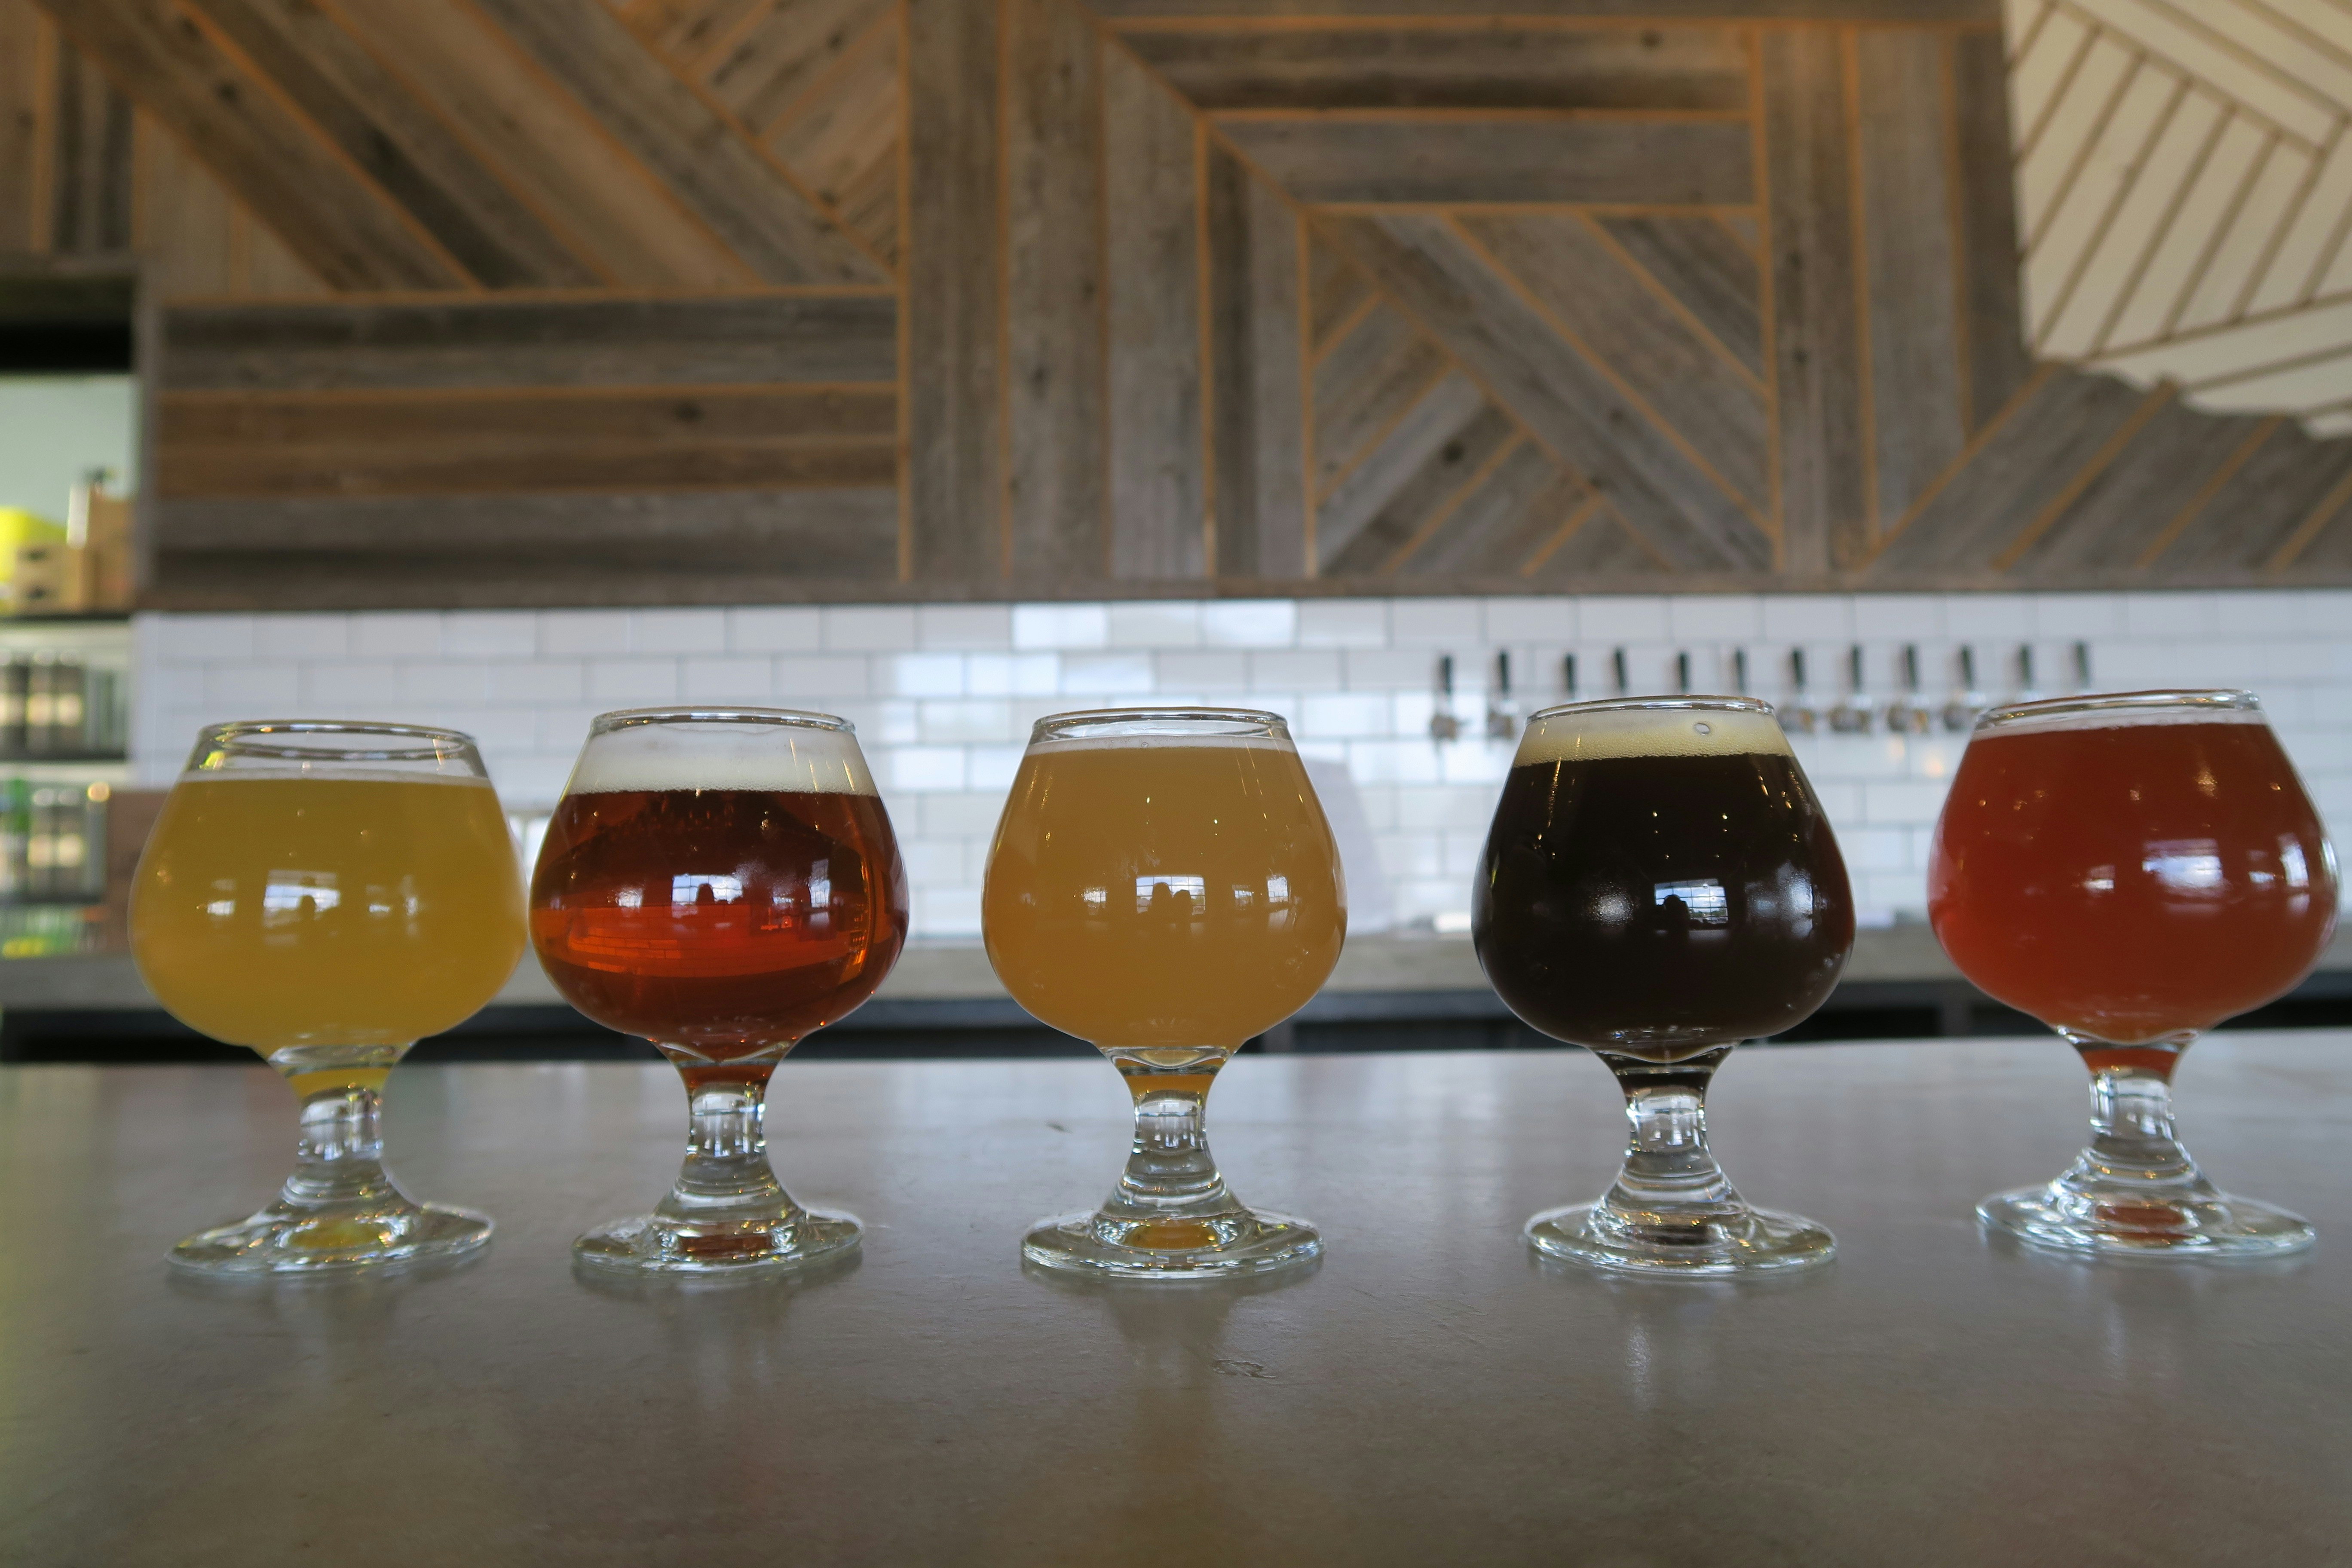 Five glasses of beer of varying colors sit on a light-colored bar